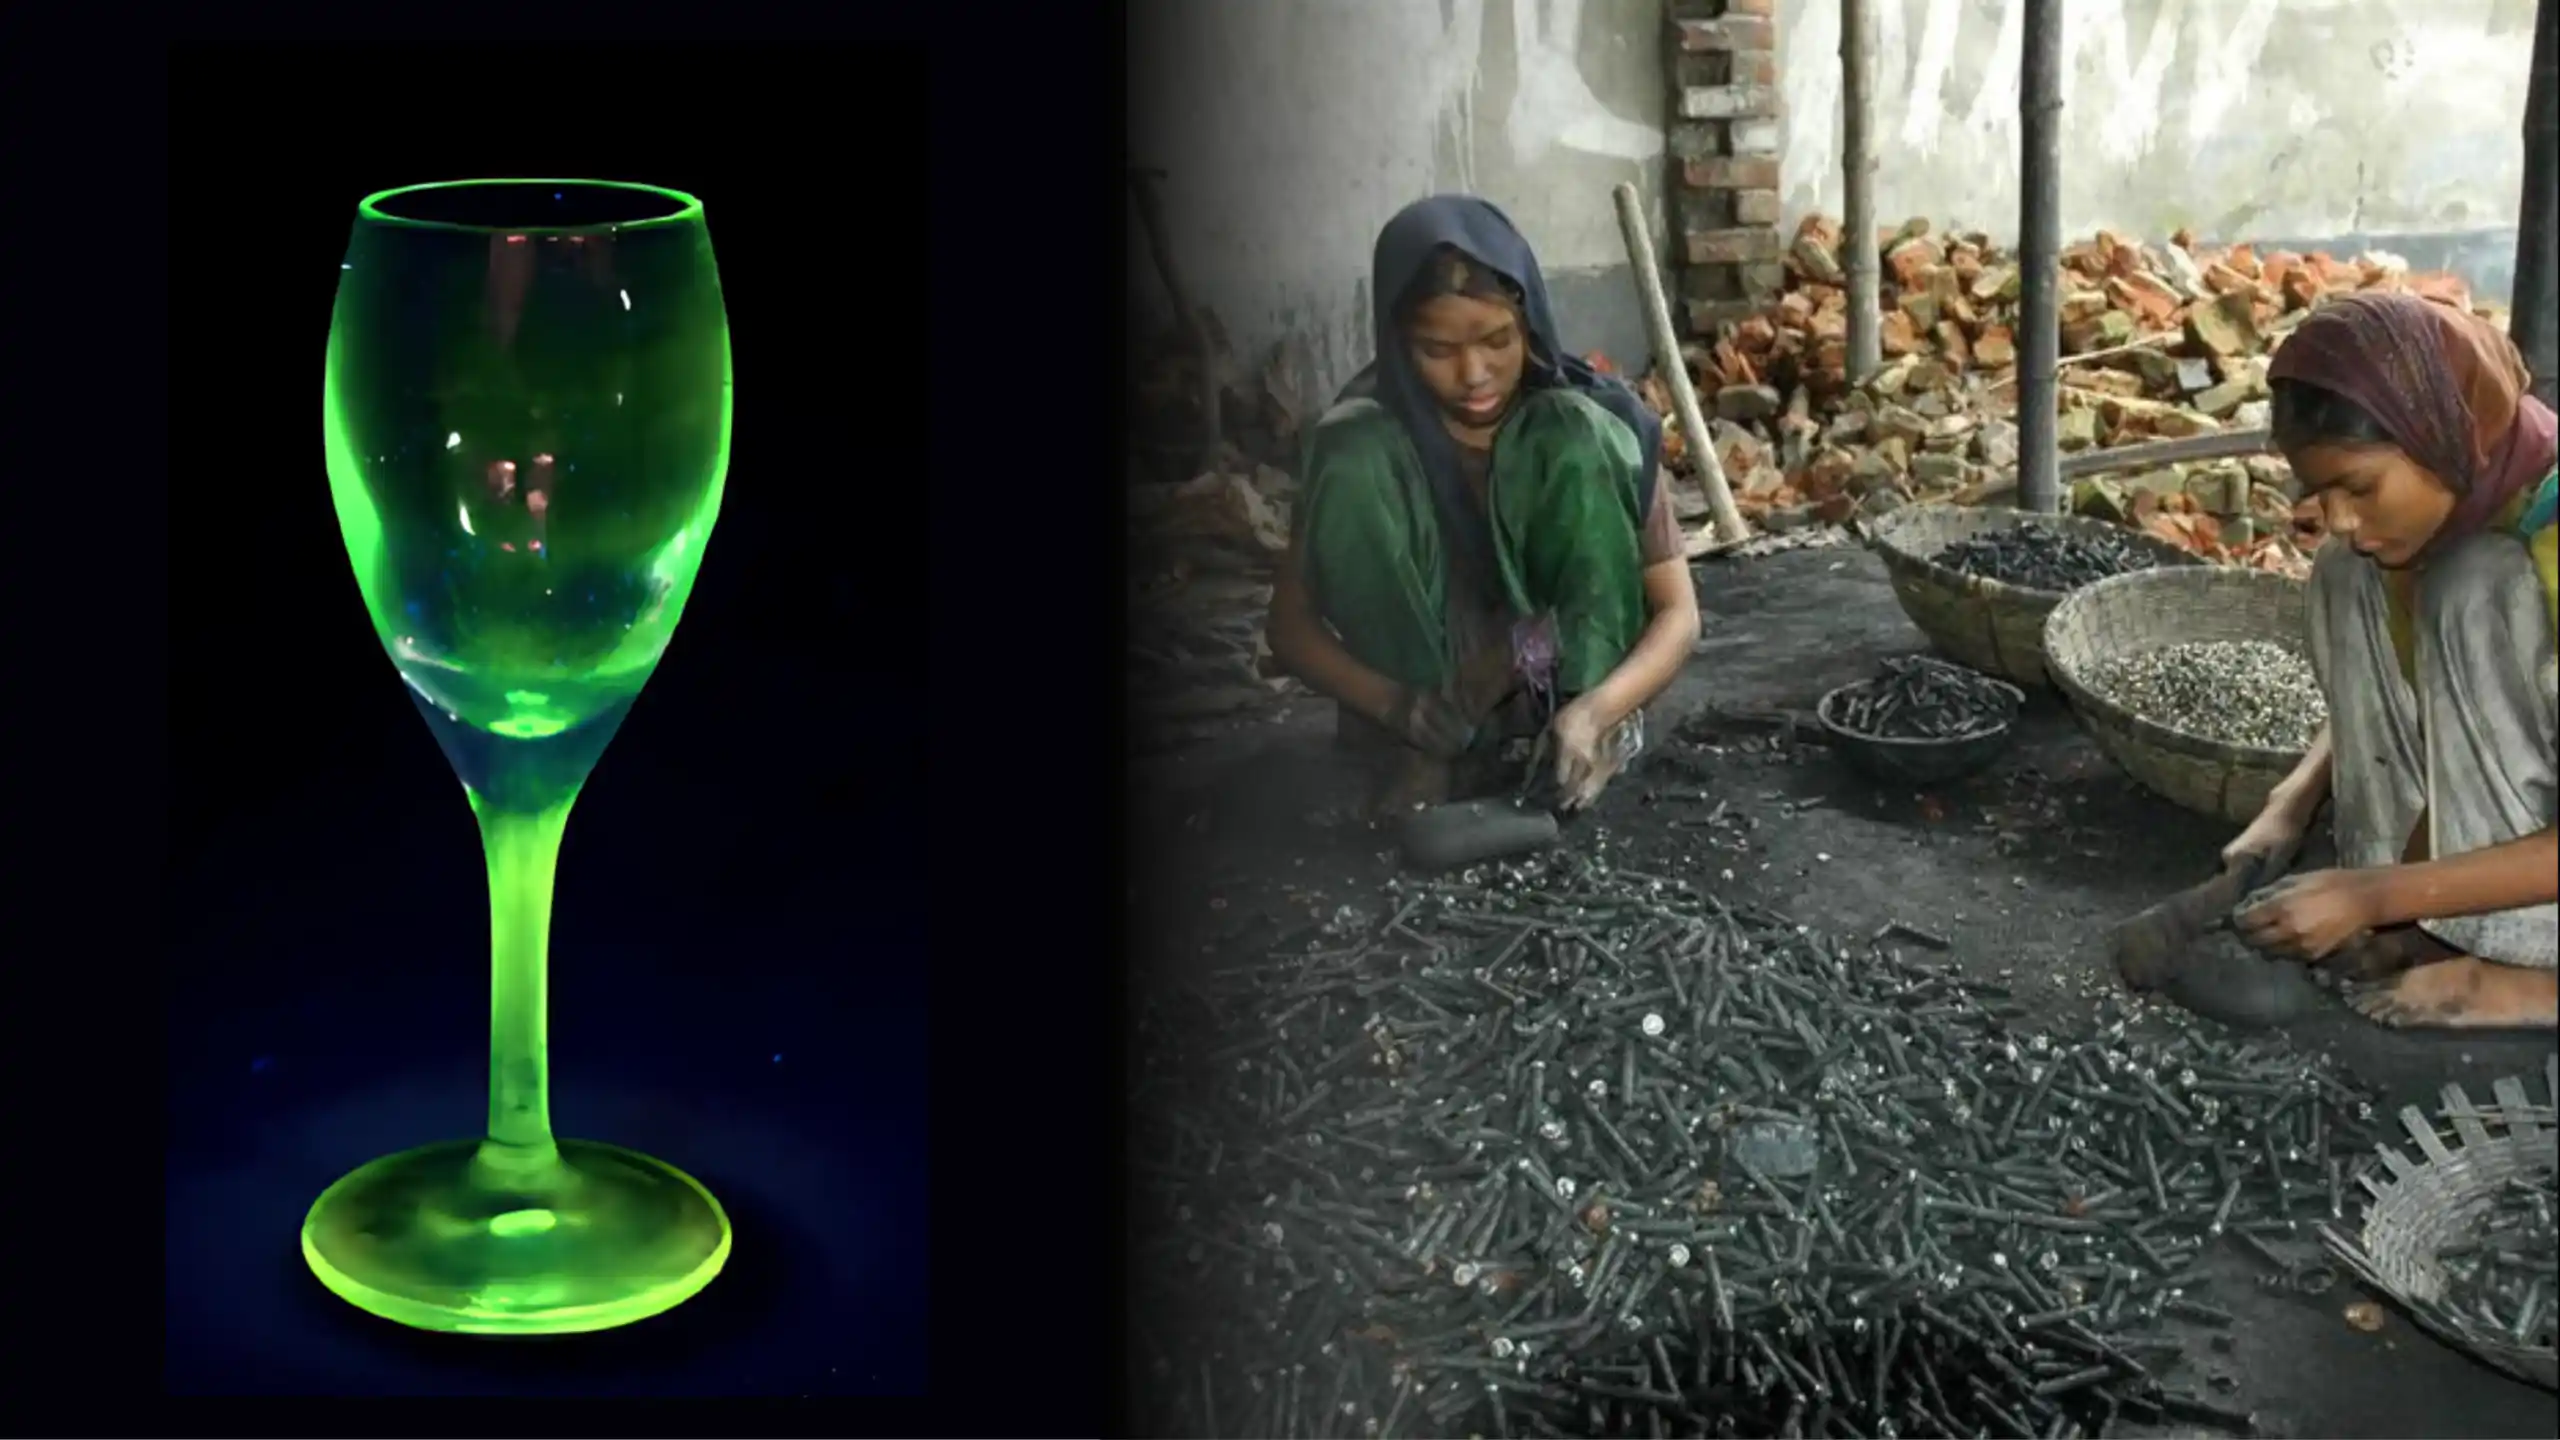 Left: a wine glass glows green. Right: two women are separating metals without protections